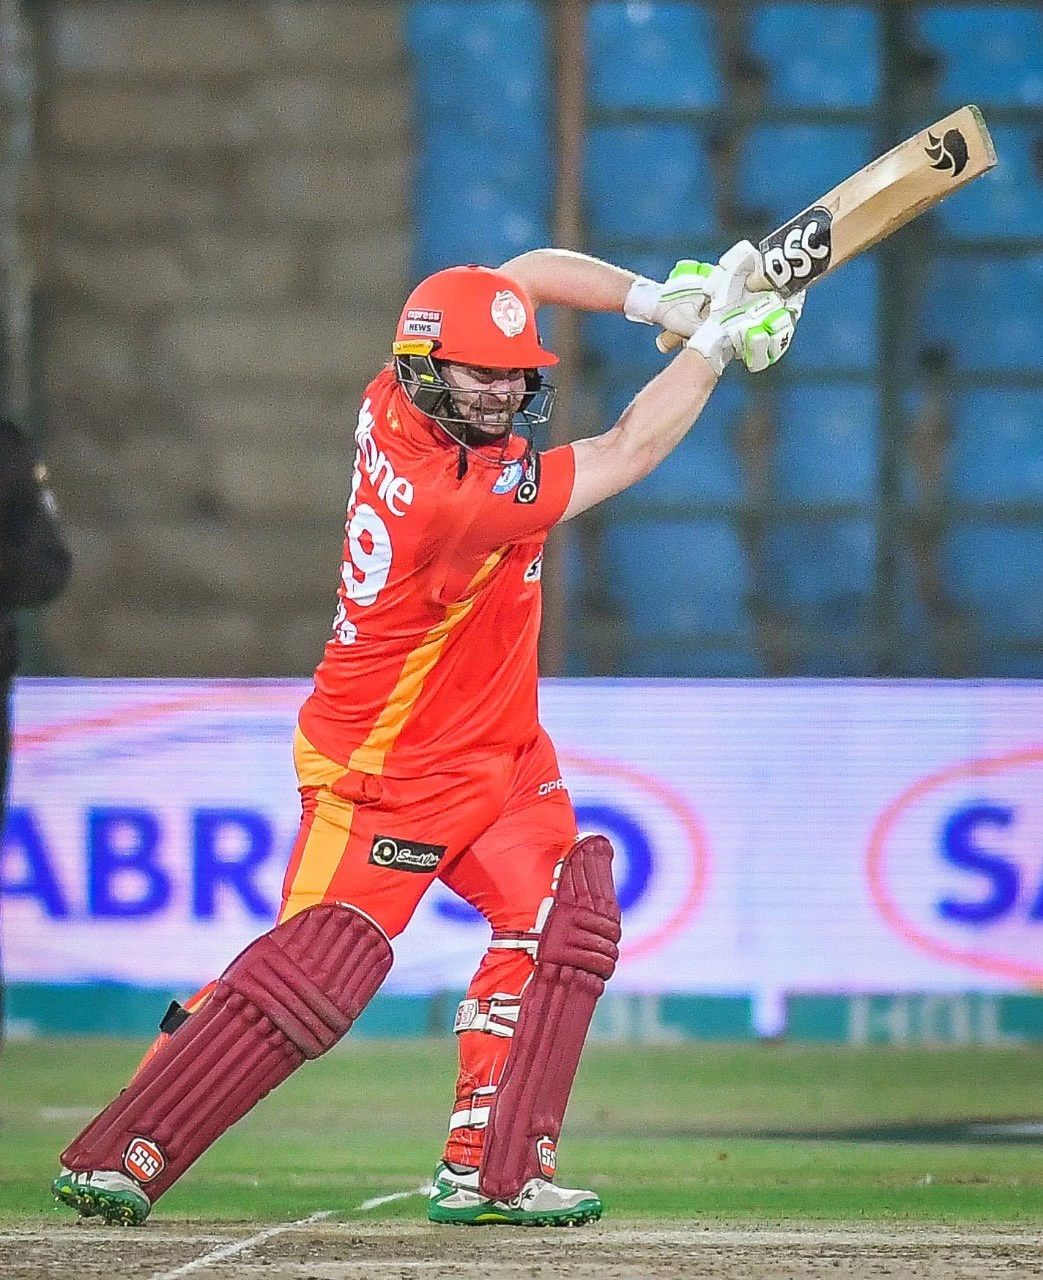 Islamabad United beat Quetta Gladiators by 6 wickets